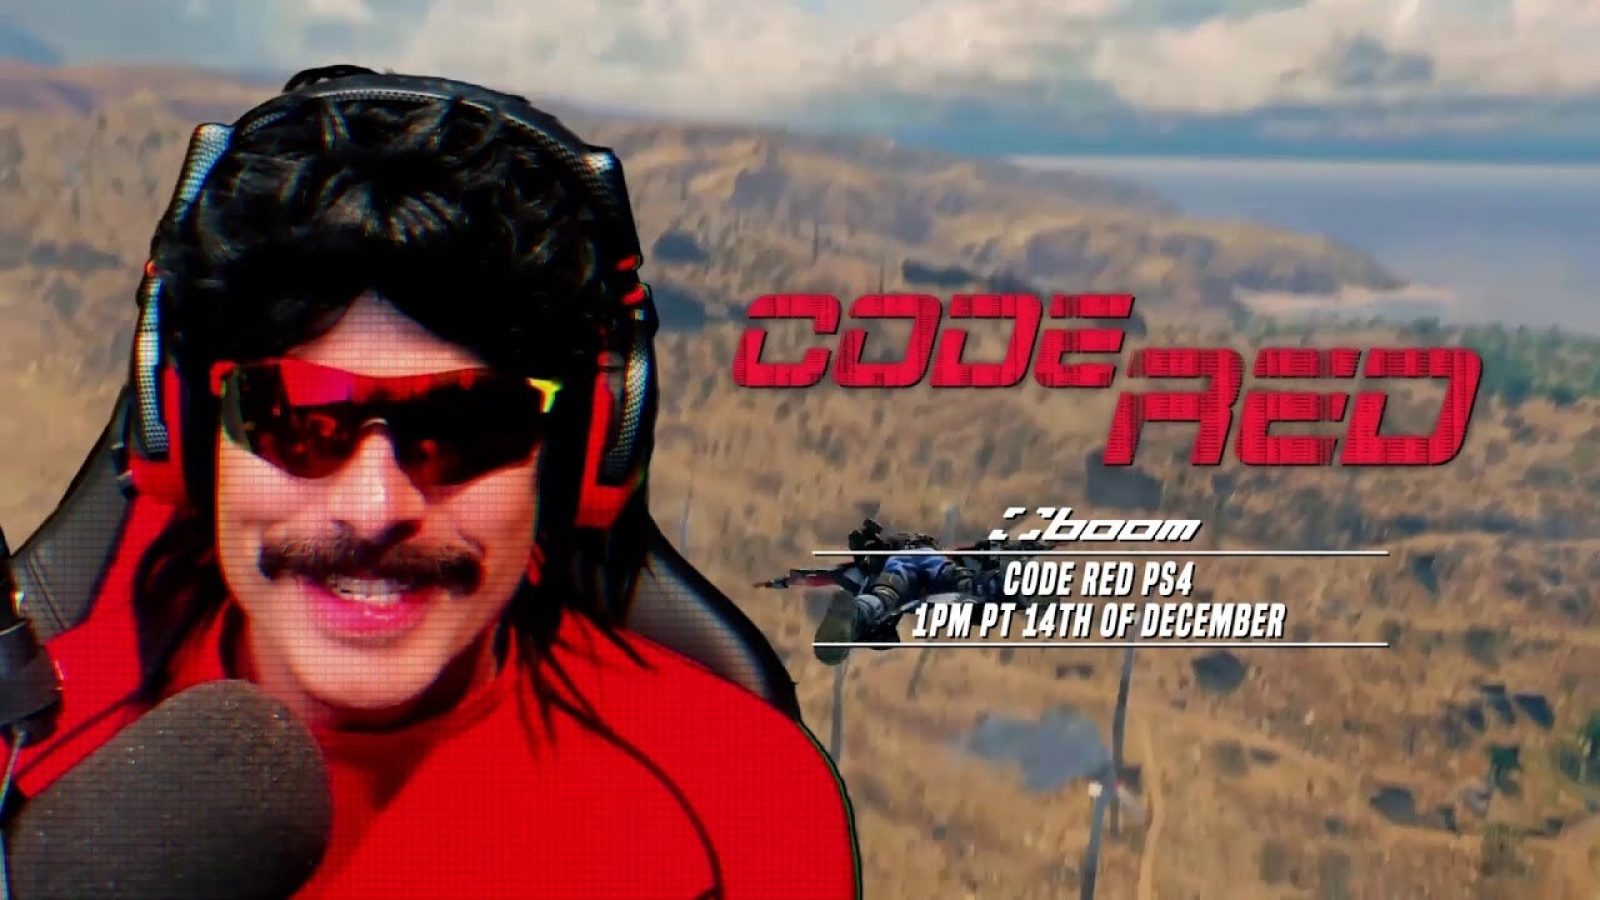 Kollega smykker skuffe How to watch Dr DisRespect's December 14 Code Red Blackout tournament ft.  Scump, Clayster, Dashy, ACHES and more – Streams, Bracket, Format - Dexerto